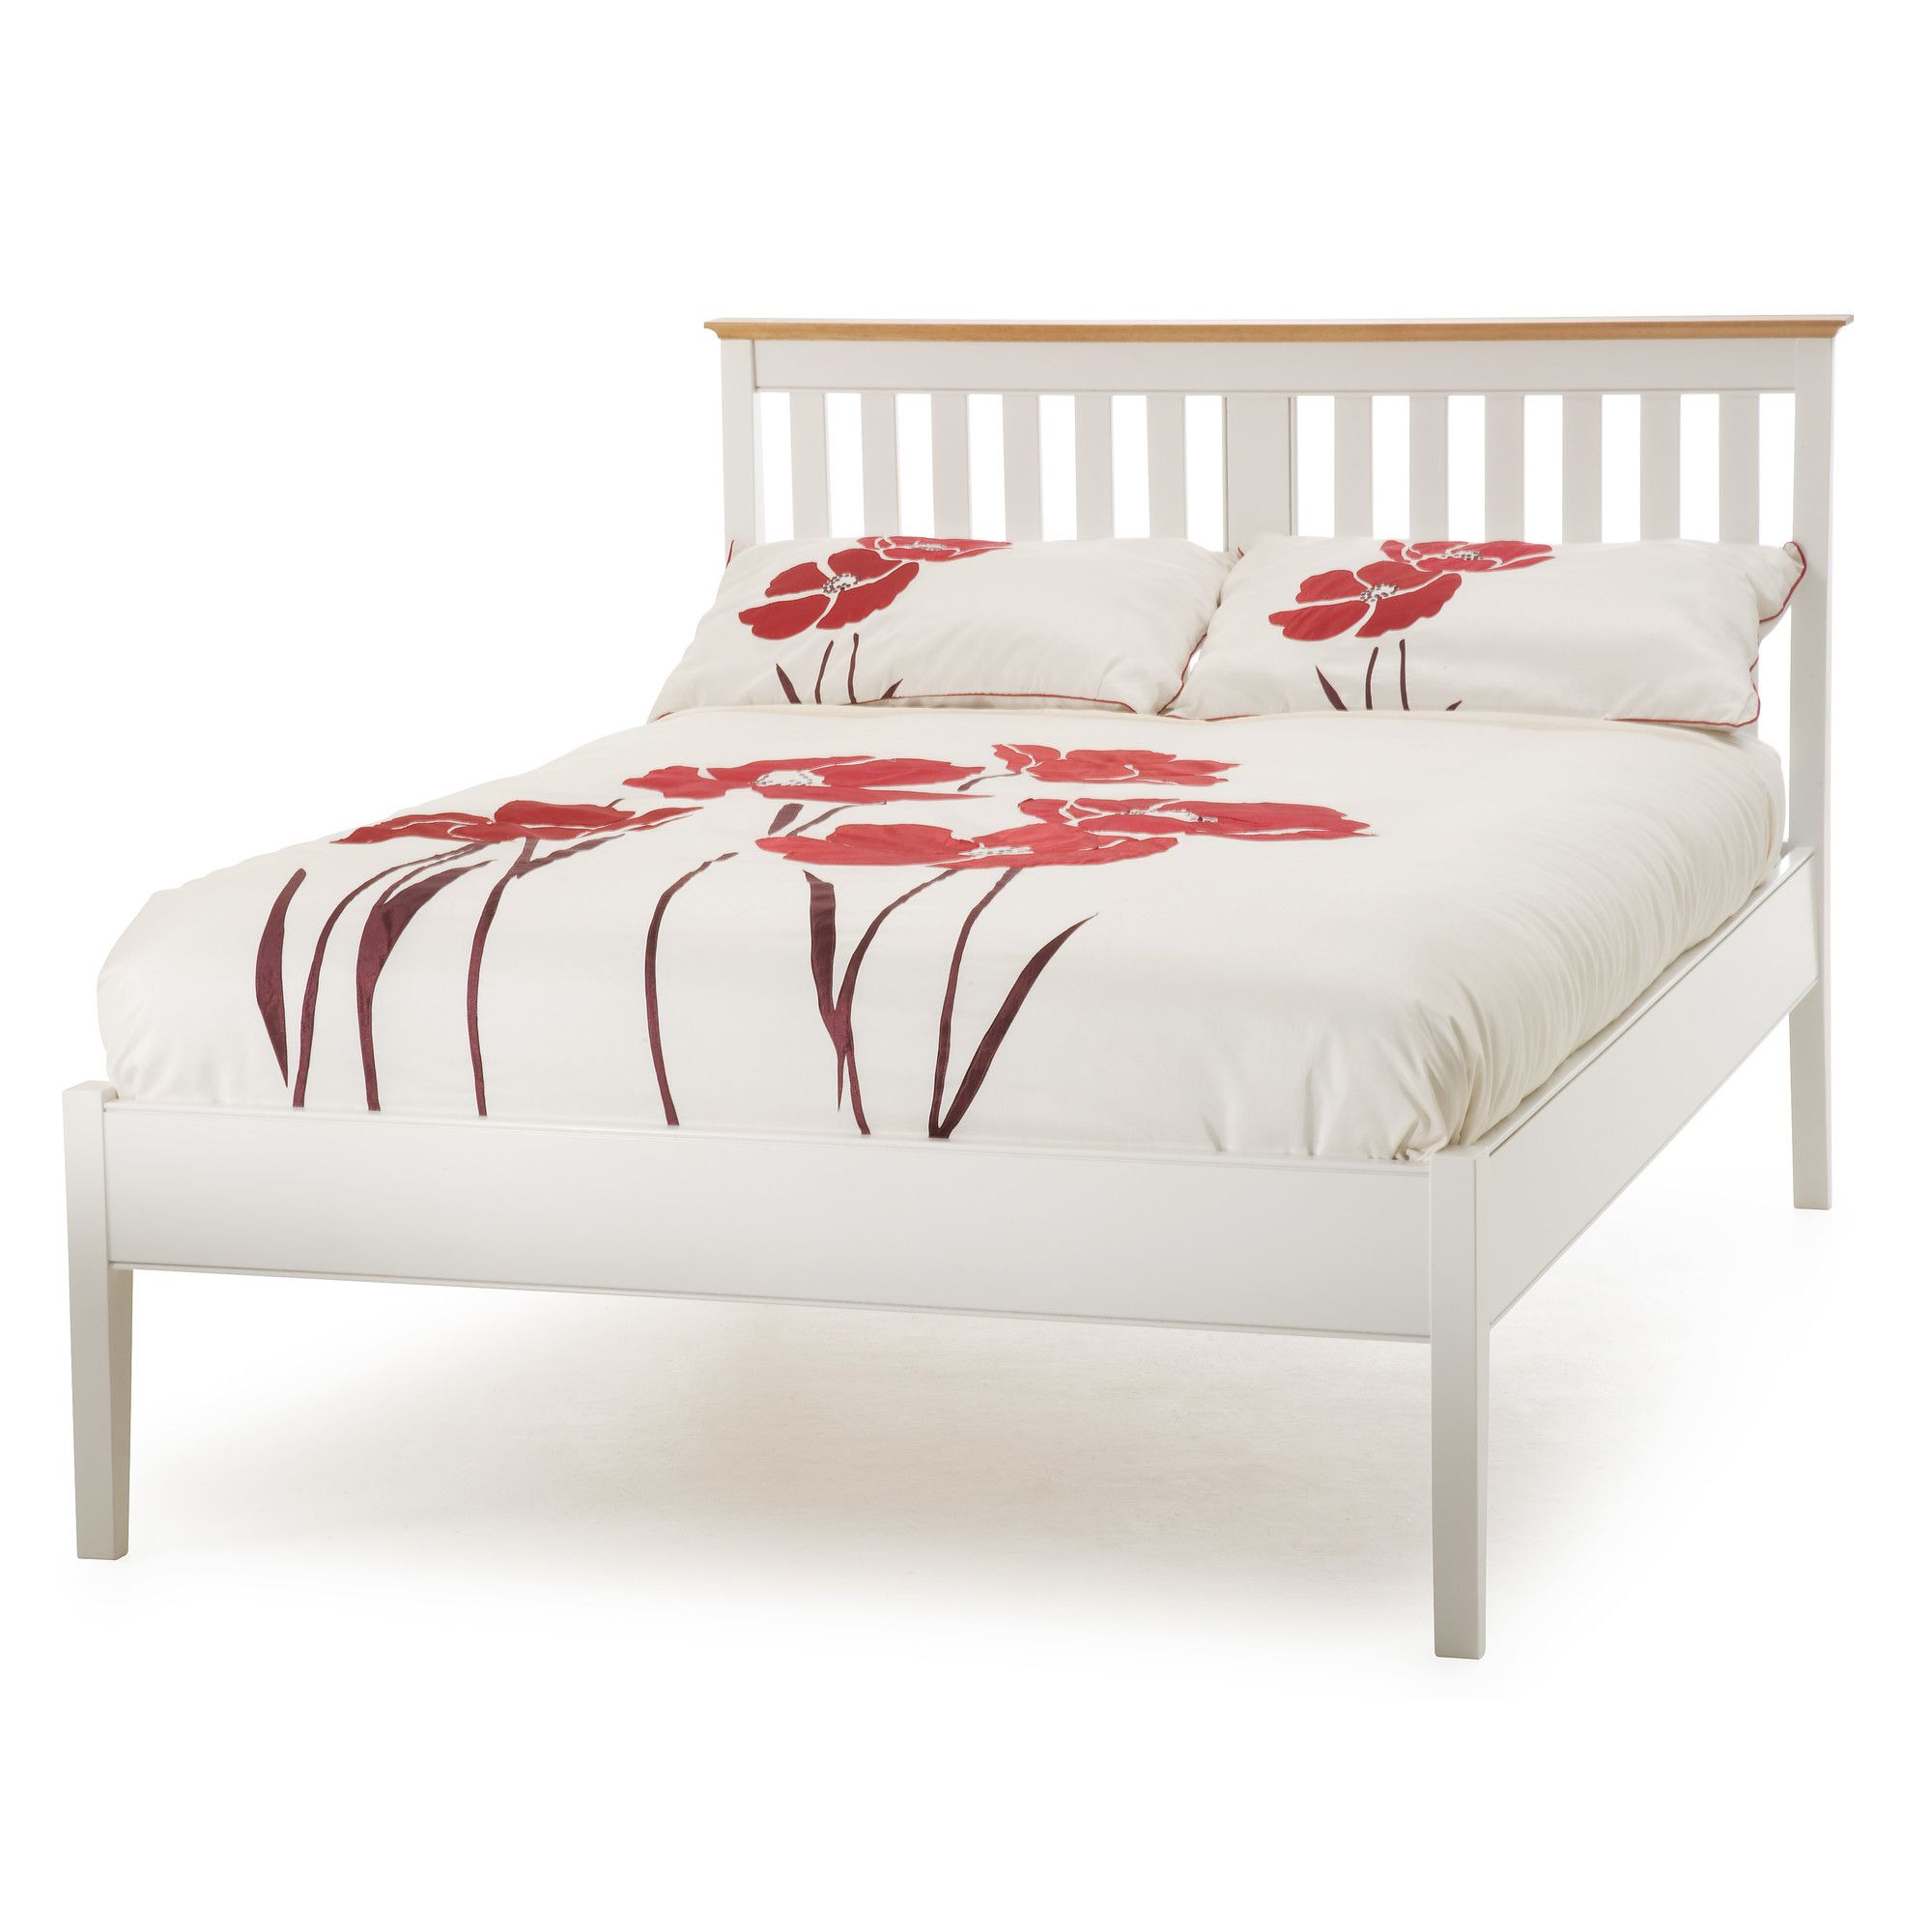 Serene Furnishings Grace Low Foot End Bed - Golden Cherry with Opal White - Small Double at Tesco Direct